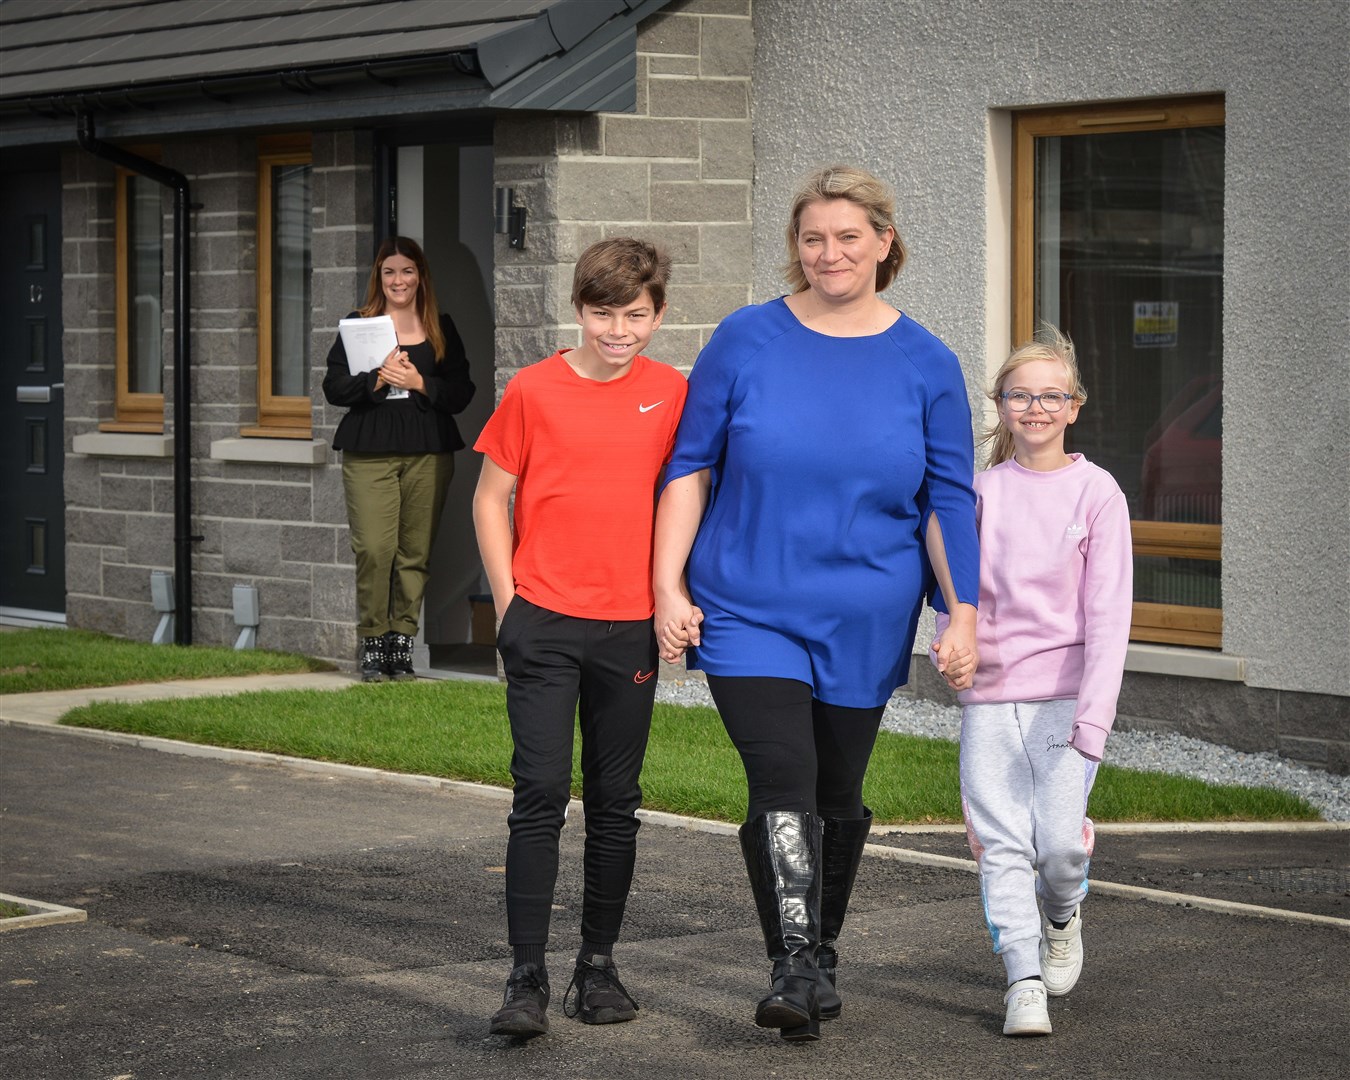 Diane Laing outside her new Osprey home on the Kinneddar Meadows estate in Lossiemouth with her children Kelvin and April. Handing over the keys was Osprey housing officer Rhiannon Garbutt (left).